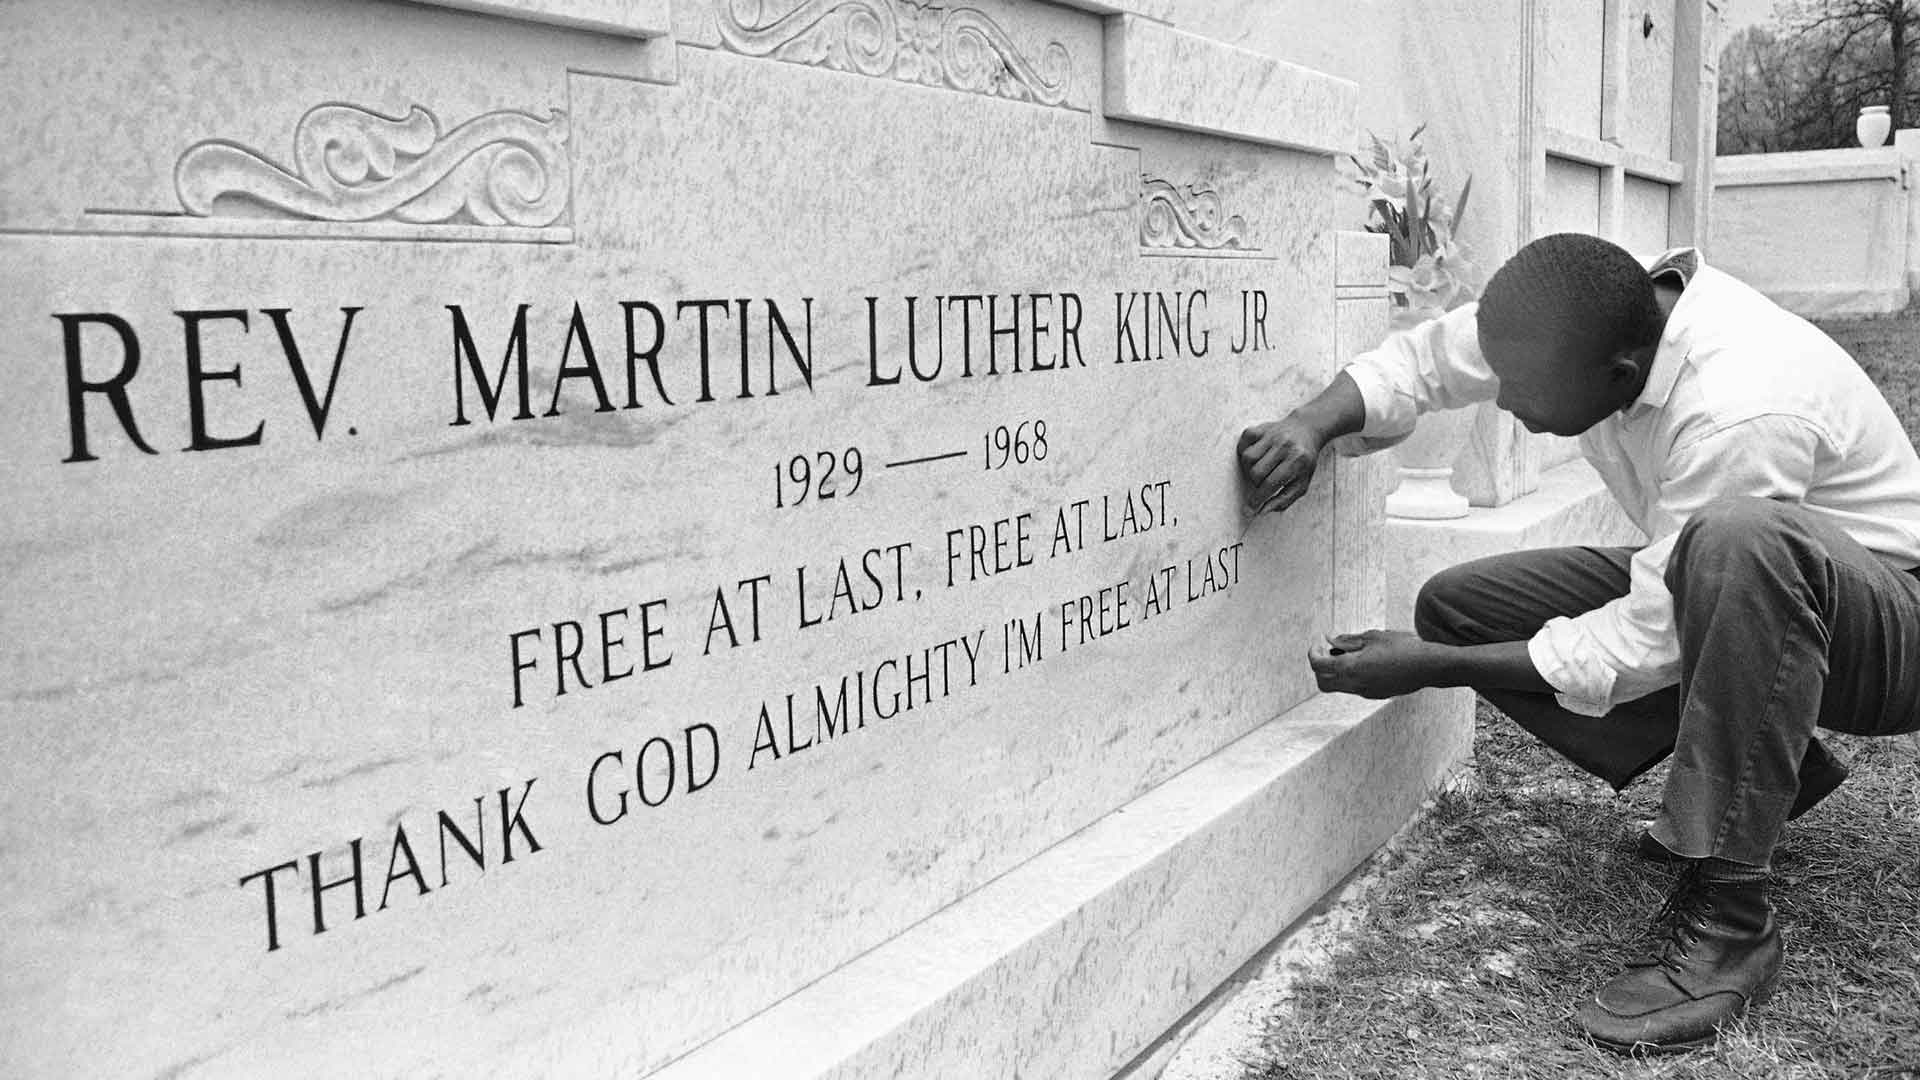 Charles Arnold touches up the lettering which was stenciled on the crypt of Dr. Martin Luther King in Atlanta on April 8, 1968. (AP Photo/Charles Kelly)